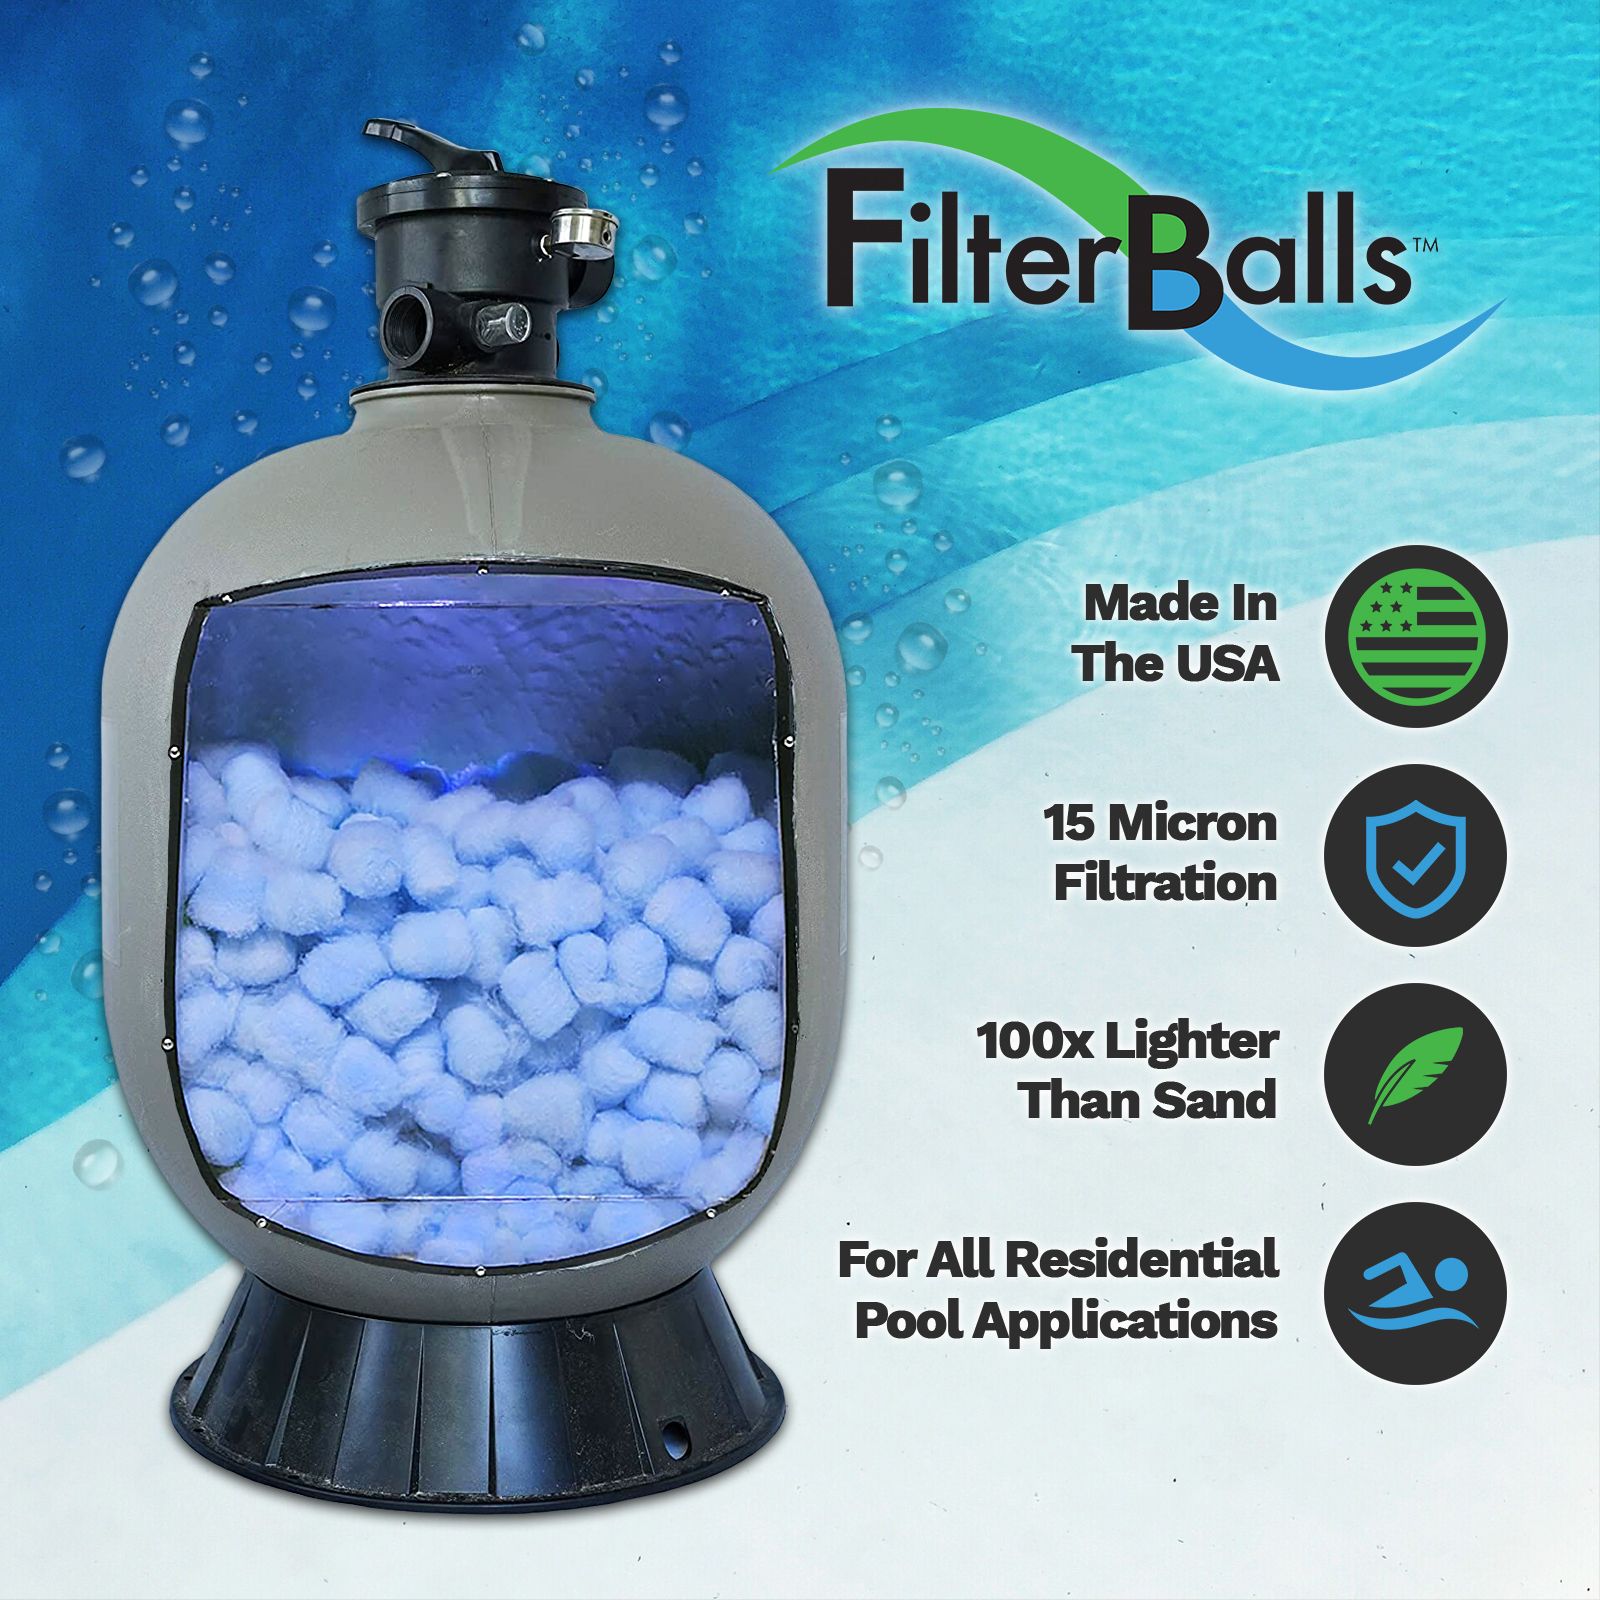 Agriculture Easy to Install Filter Media for Pools Car Washes Zeolite and Mystic White 1 Cubic Foot Bag CleanTech Water Filter Media Replacement for Sand FIlterBalls Blu Air Filtration 